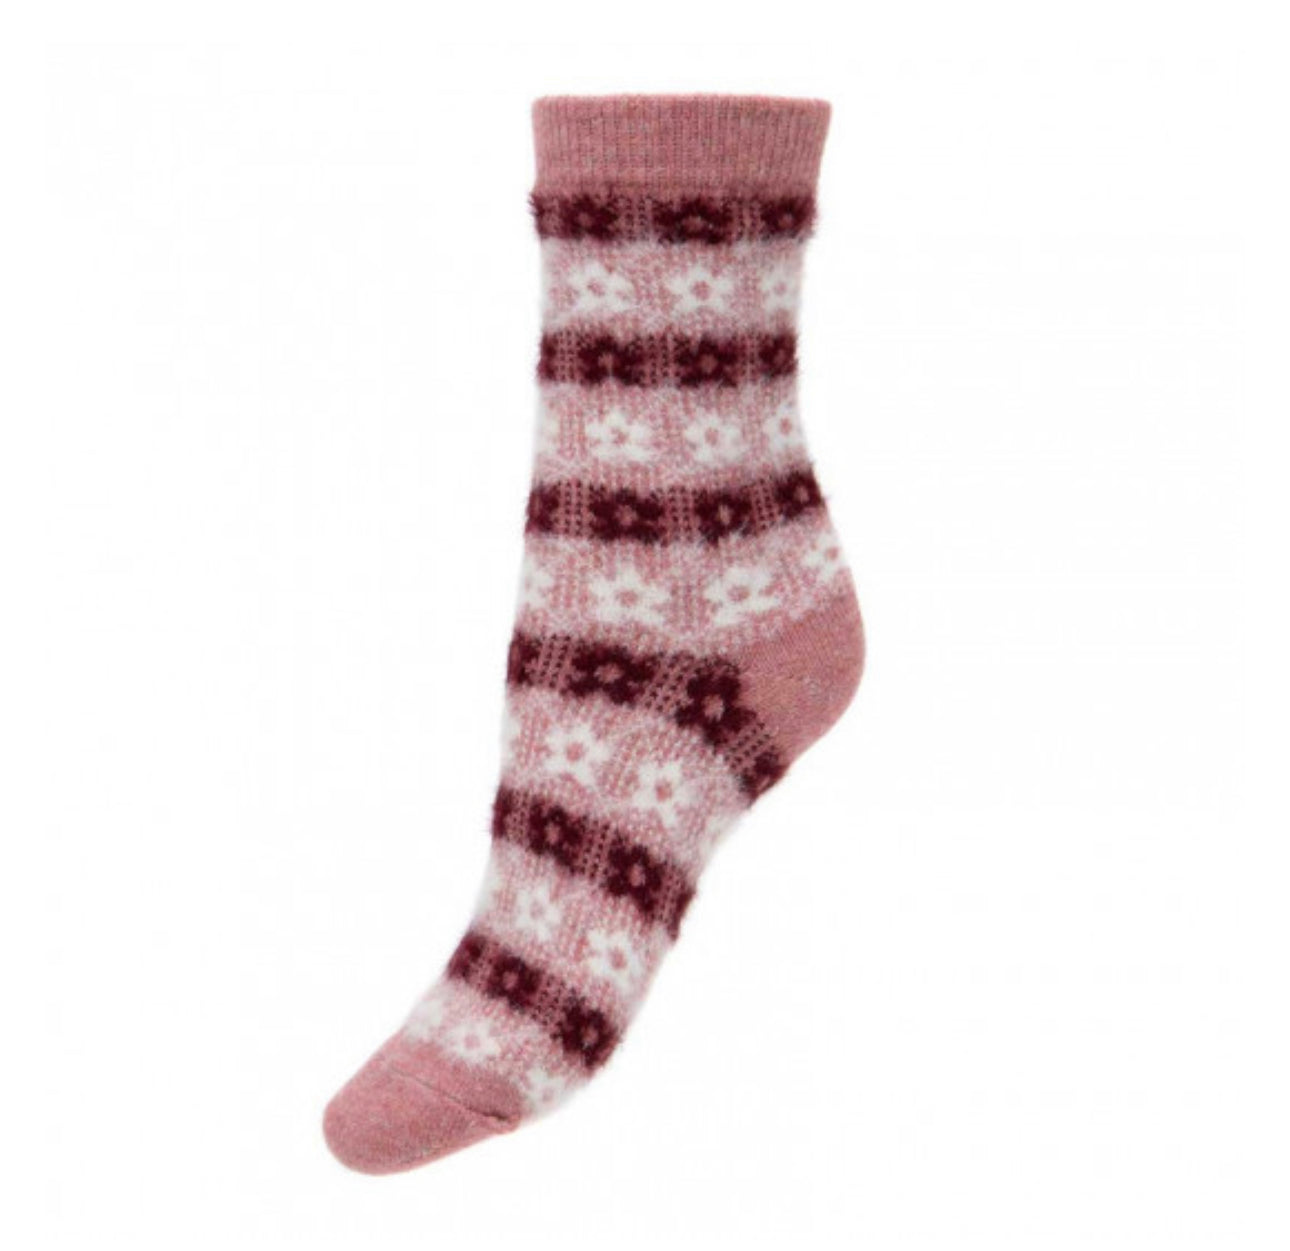 Pink and Cream Wool Blend Socks WS446